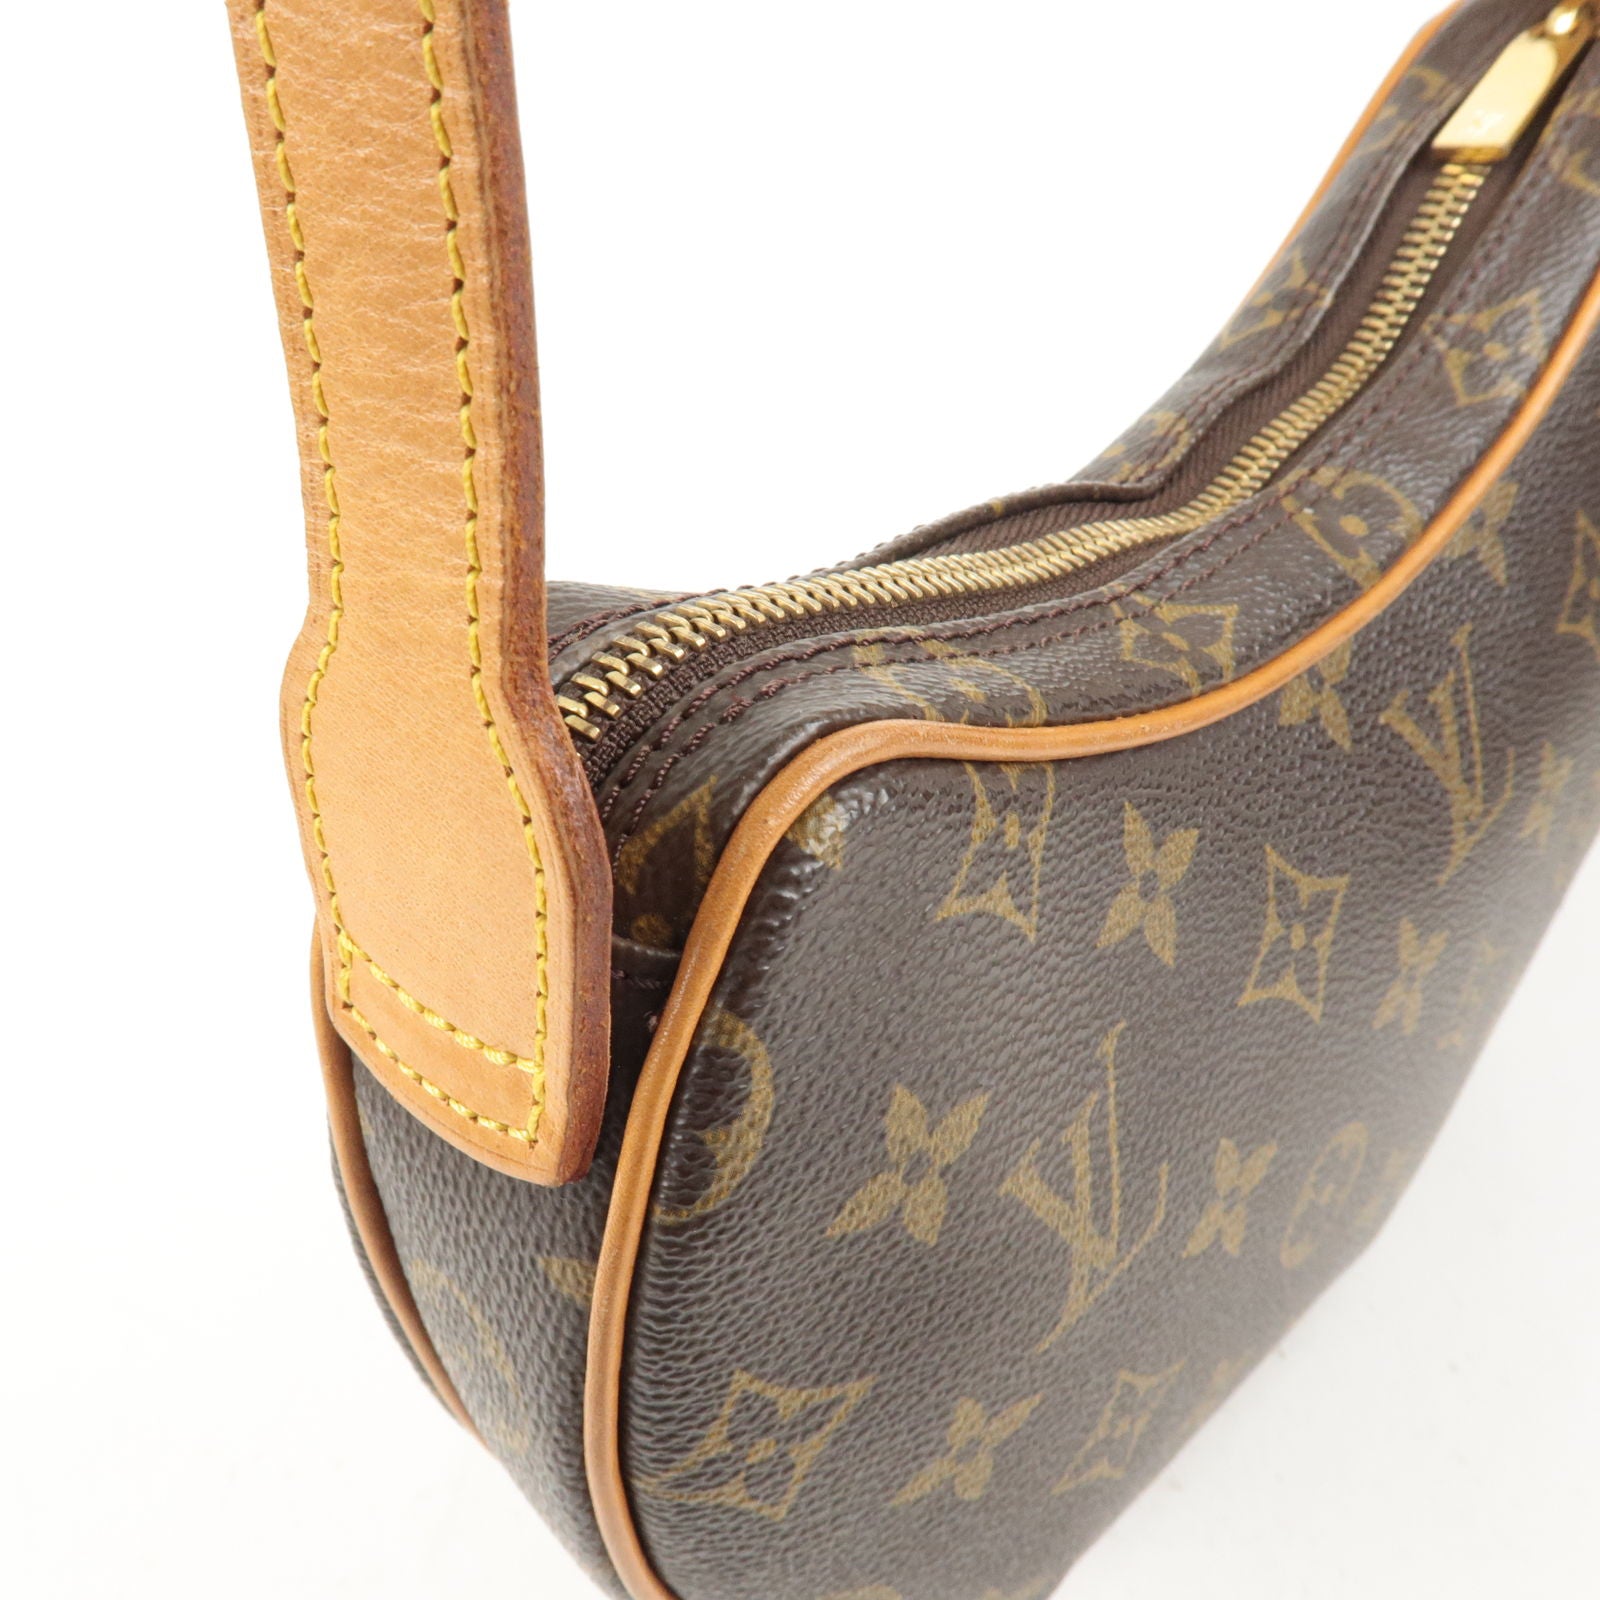 Vuitton - M51510 – Louis Vuitton 2004 pre - owned Marly crossbody